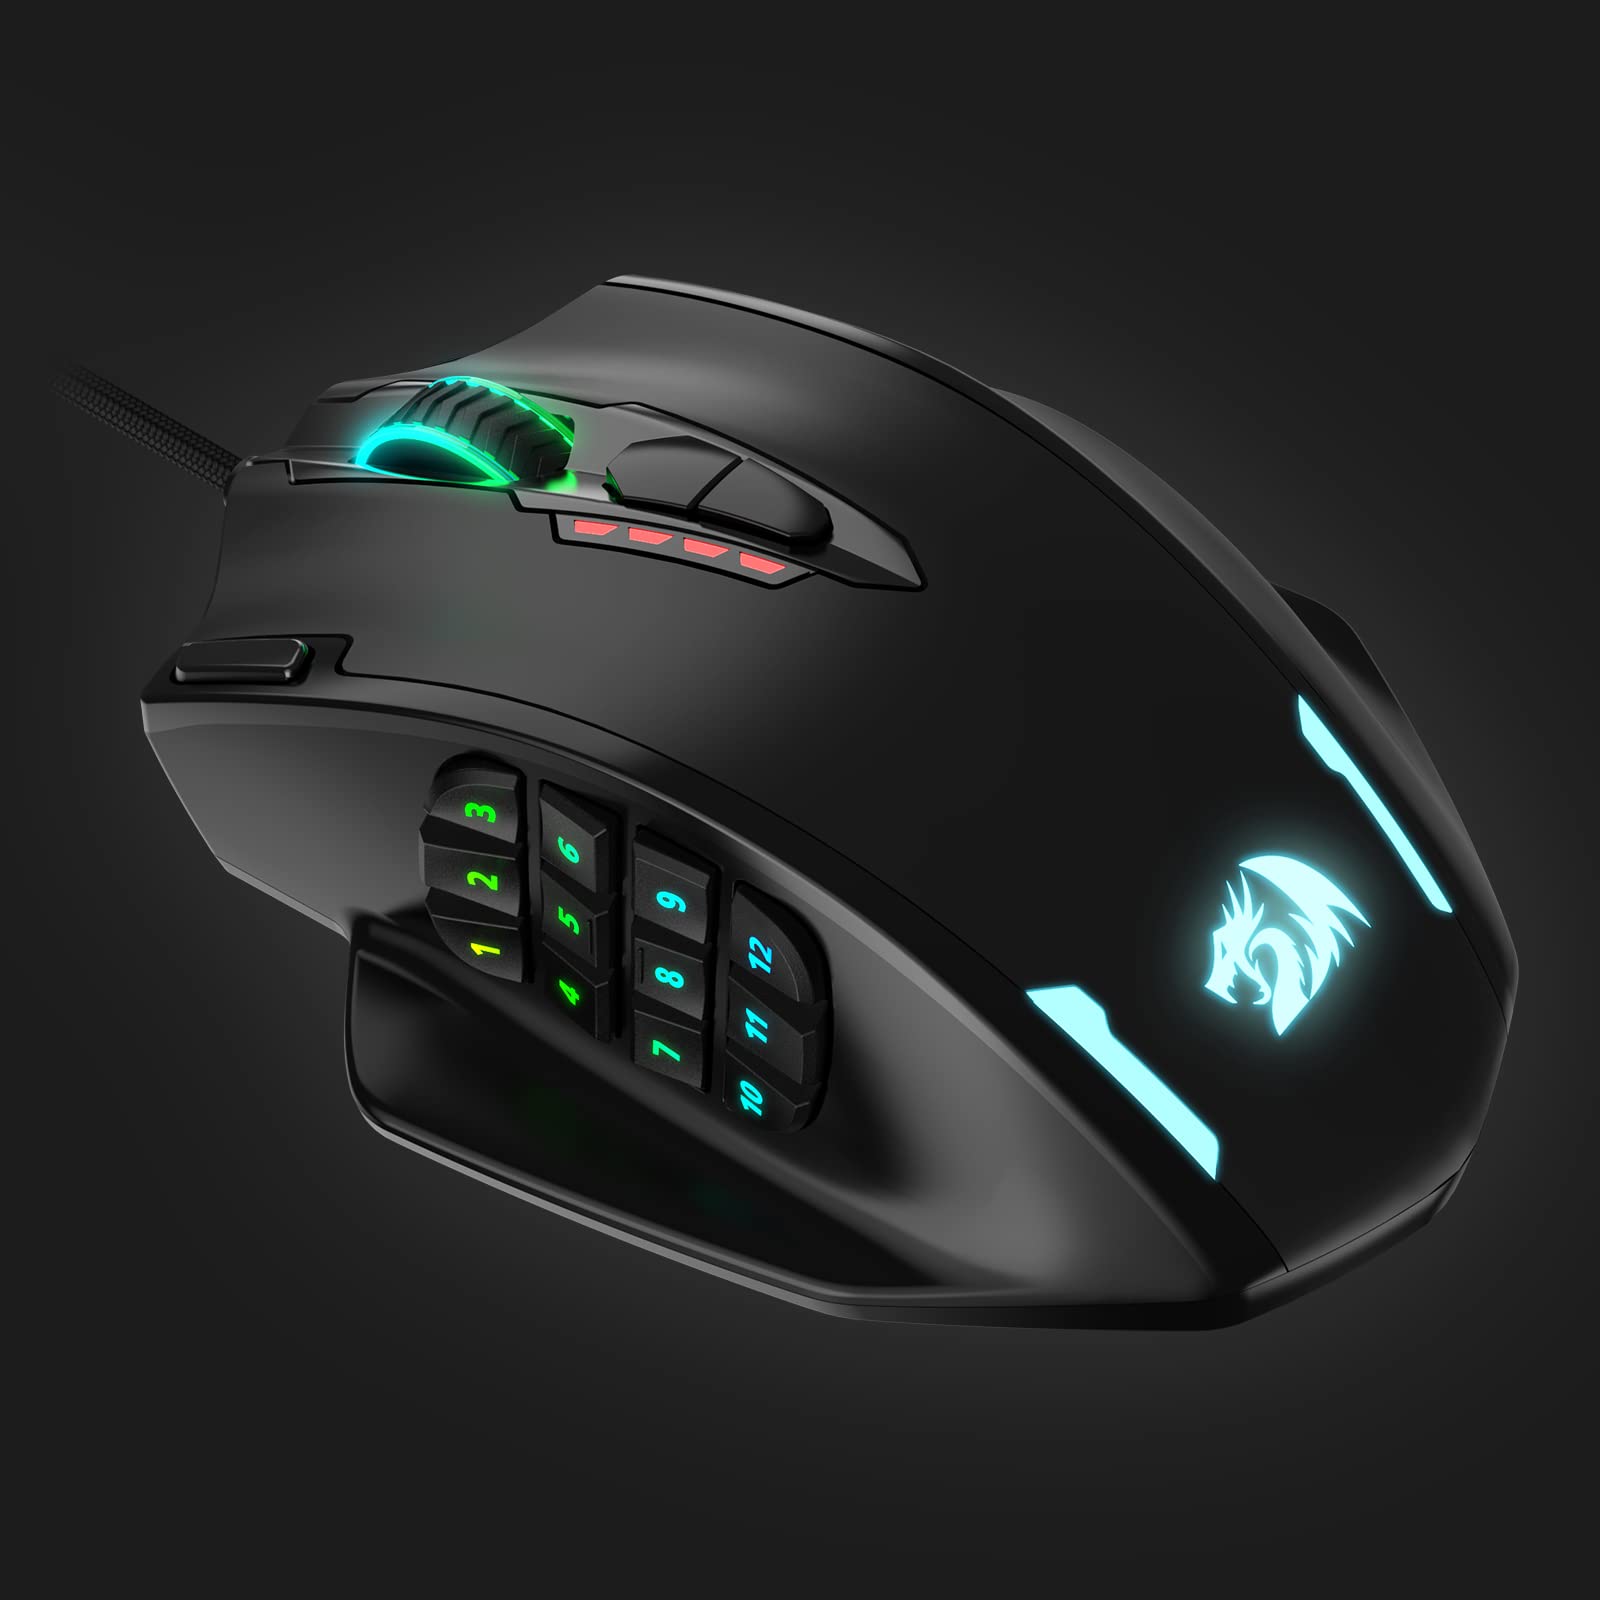 Redragon RGB LED Wired Gaming Mouse, 18 Programmable Mouse Buttons